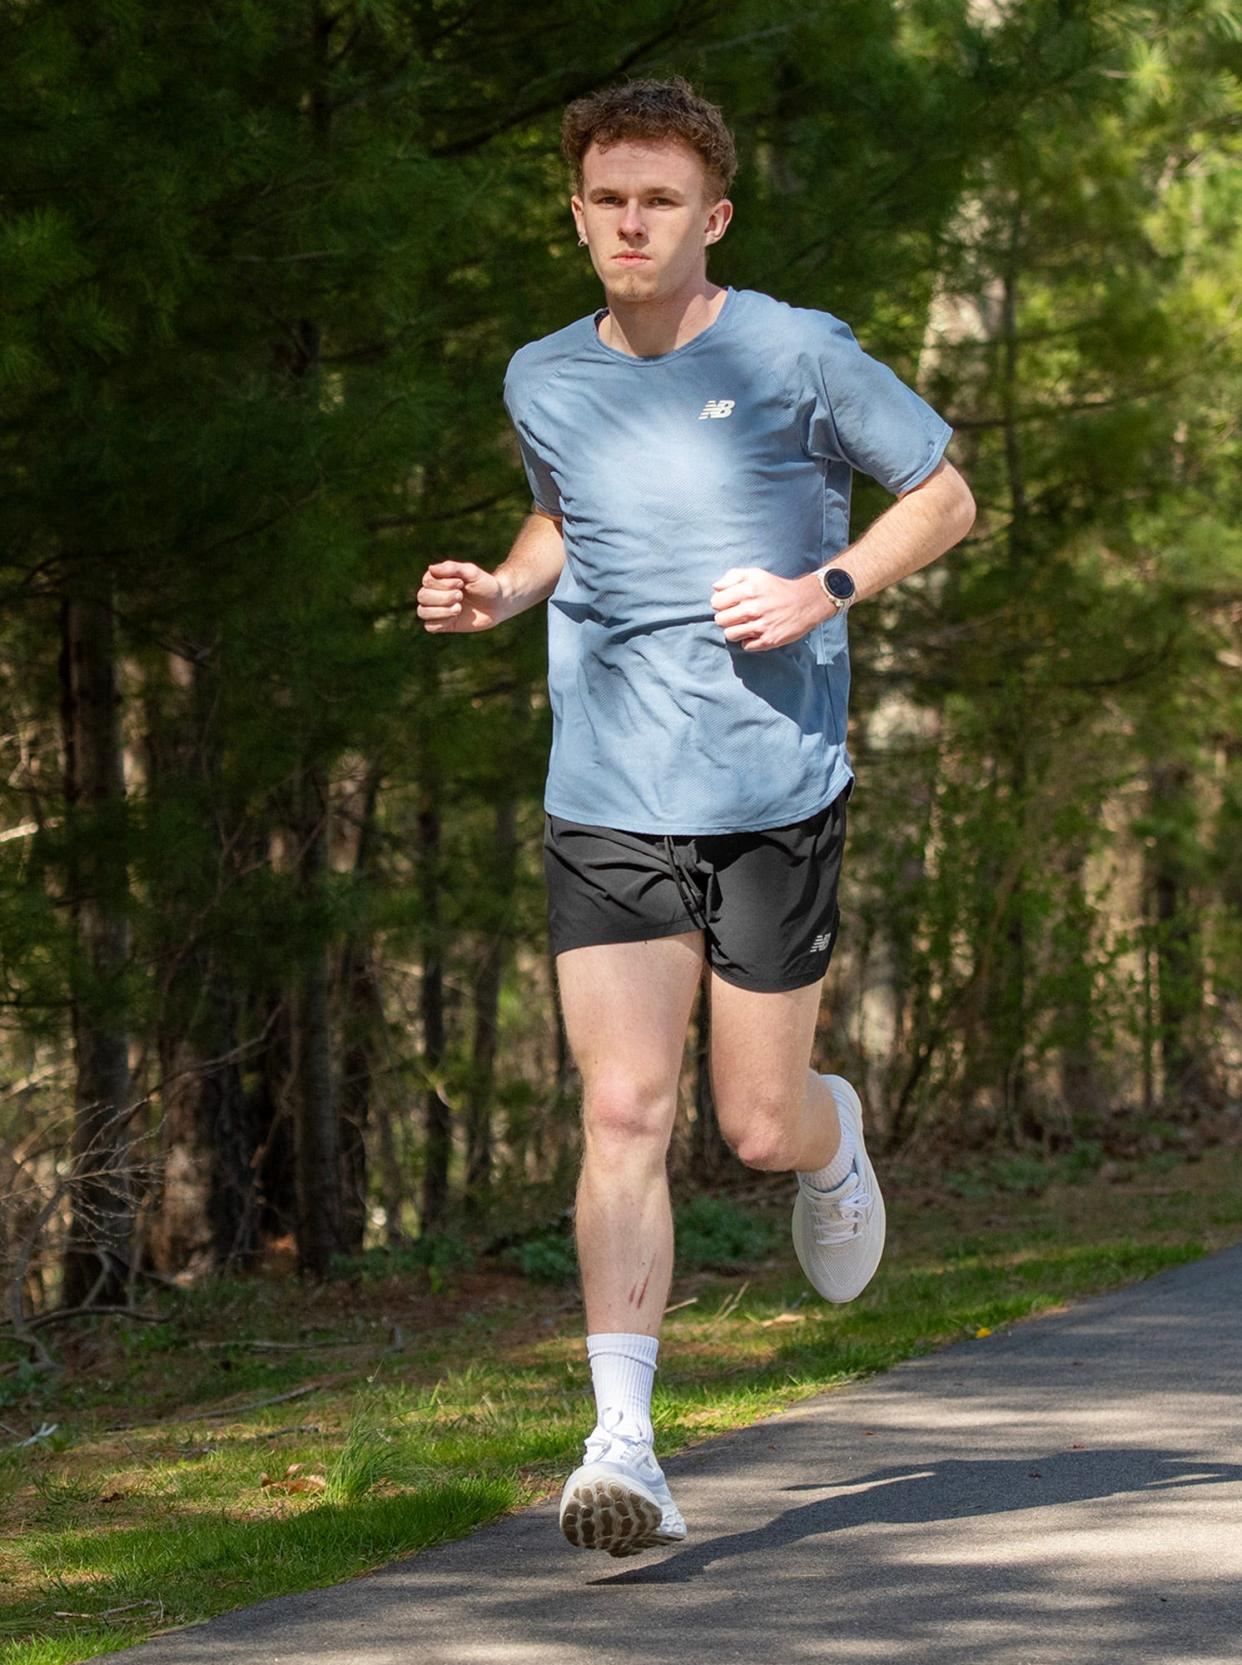 Northbridge runner Marcus Reilly shows his form on the Blackstone River Greenway last week.